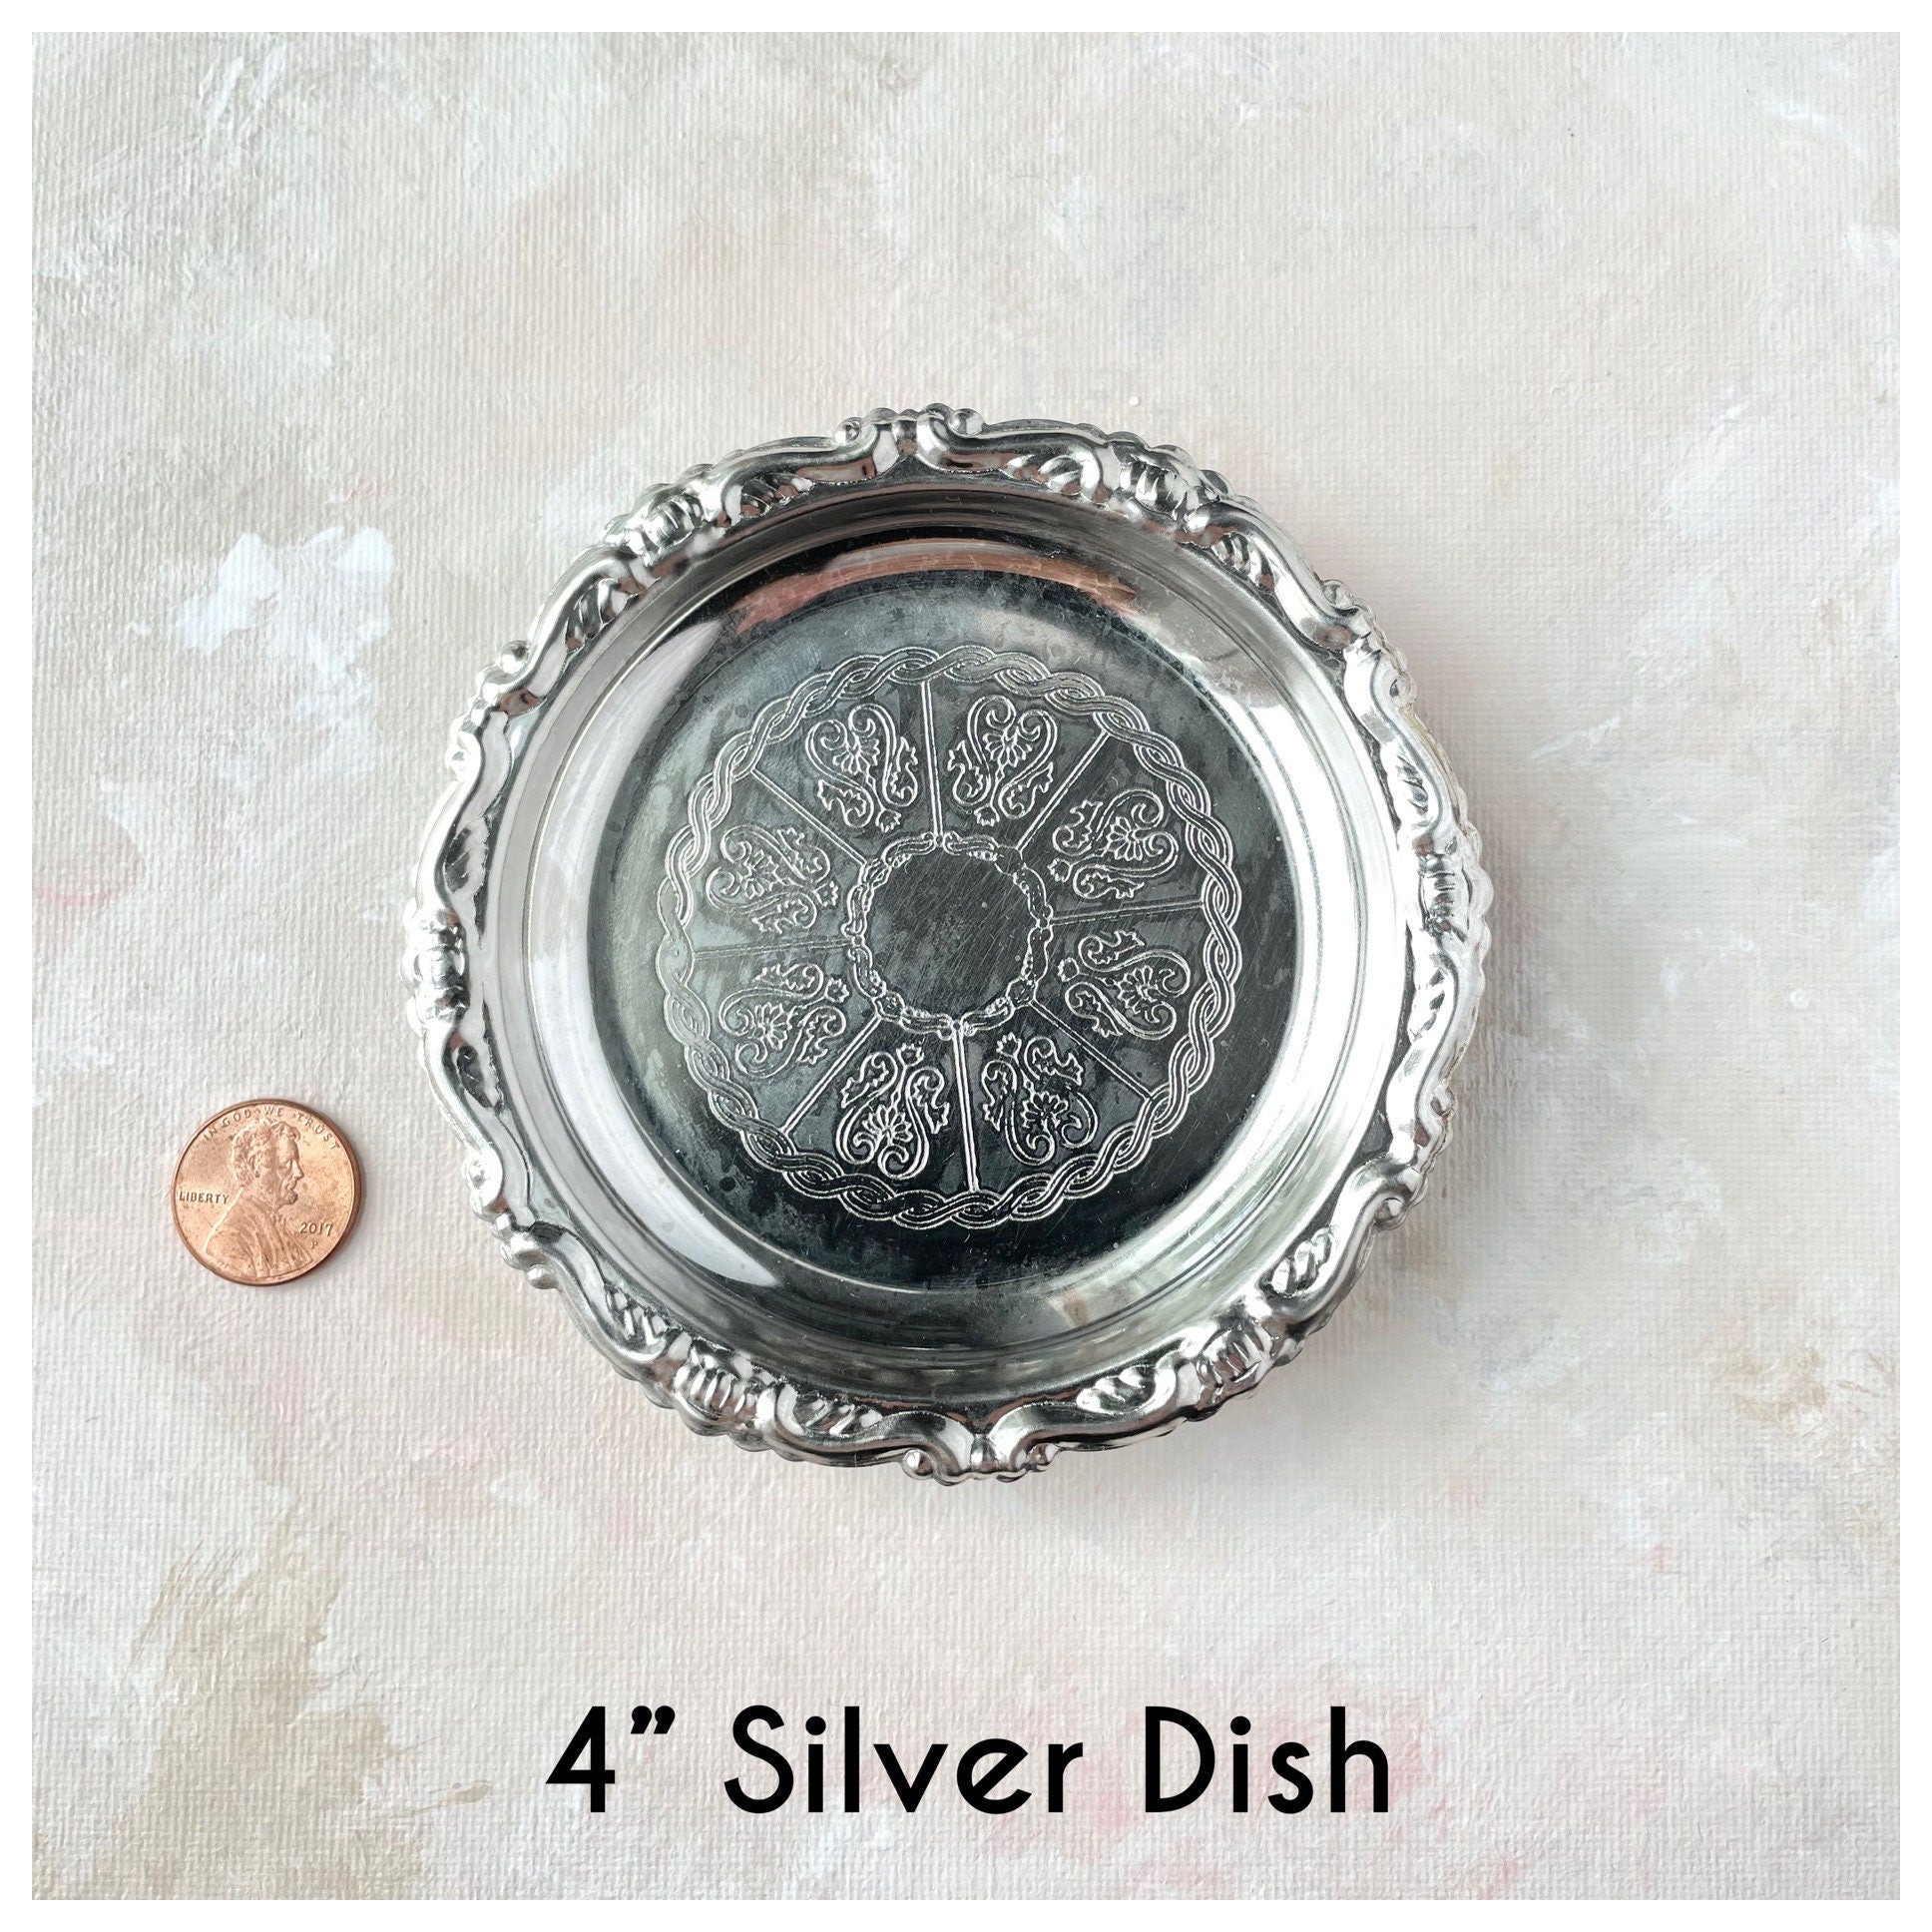 4 inch Silver round dish with penny beside for size reference - Flat lay props from Champagne & GRIT